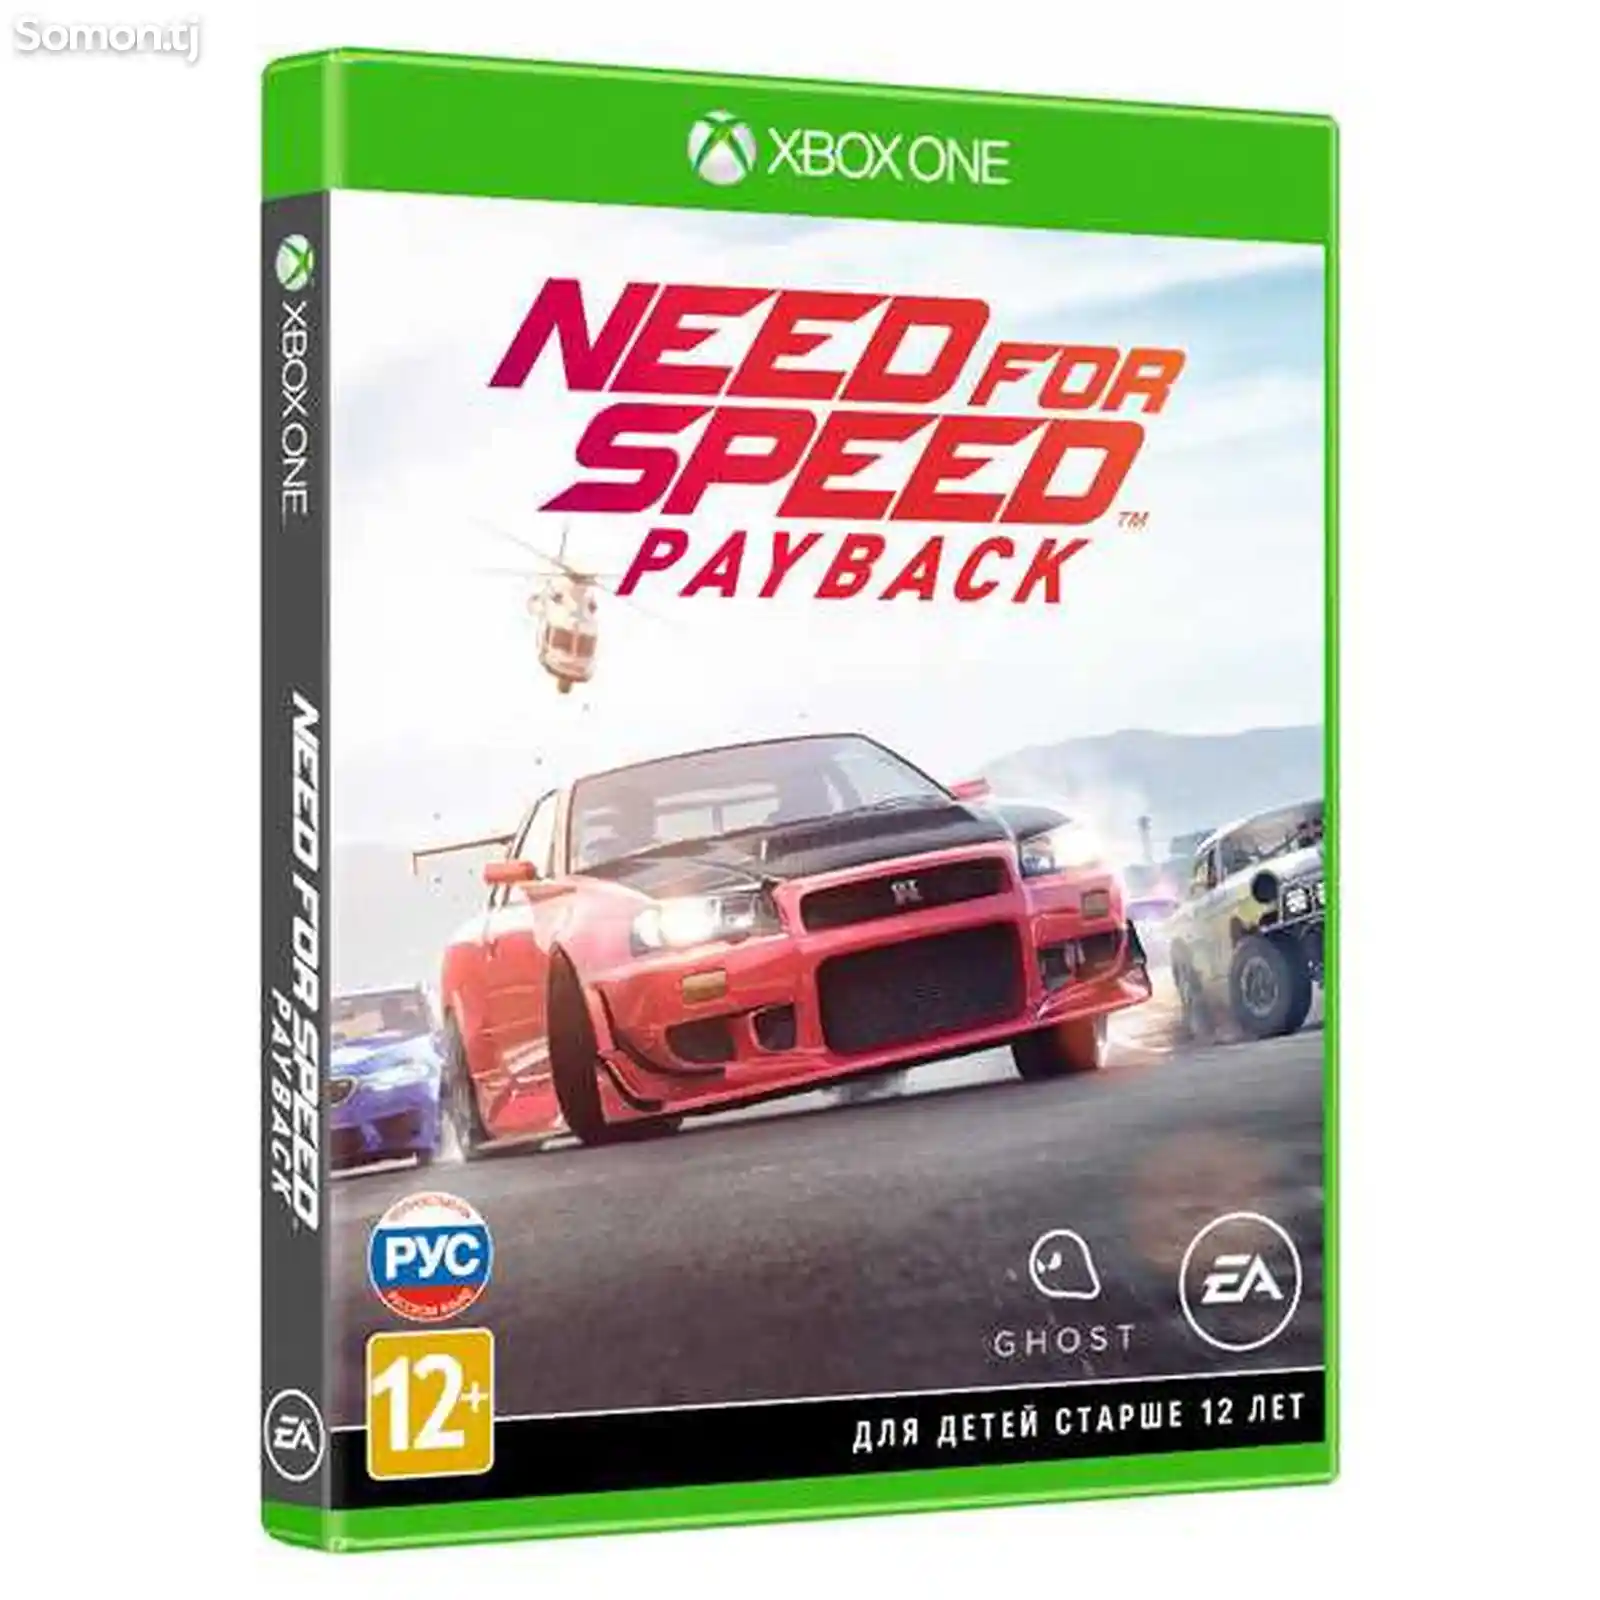 Игра Need for Speed Payback для Xbox one-1